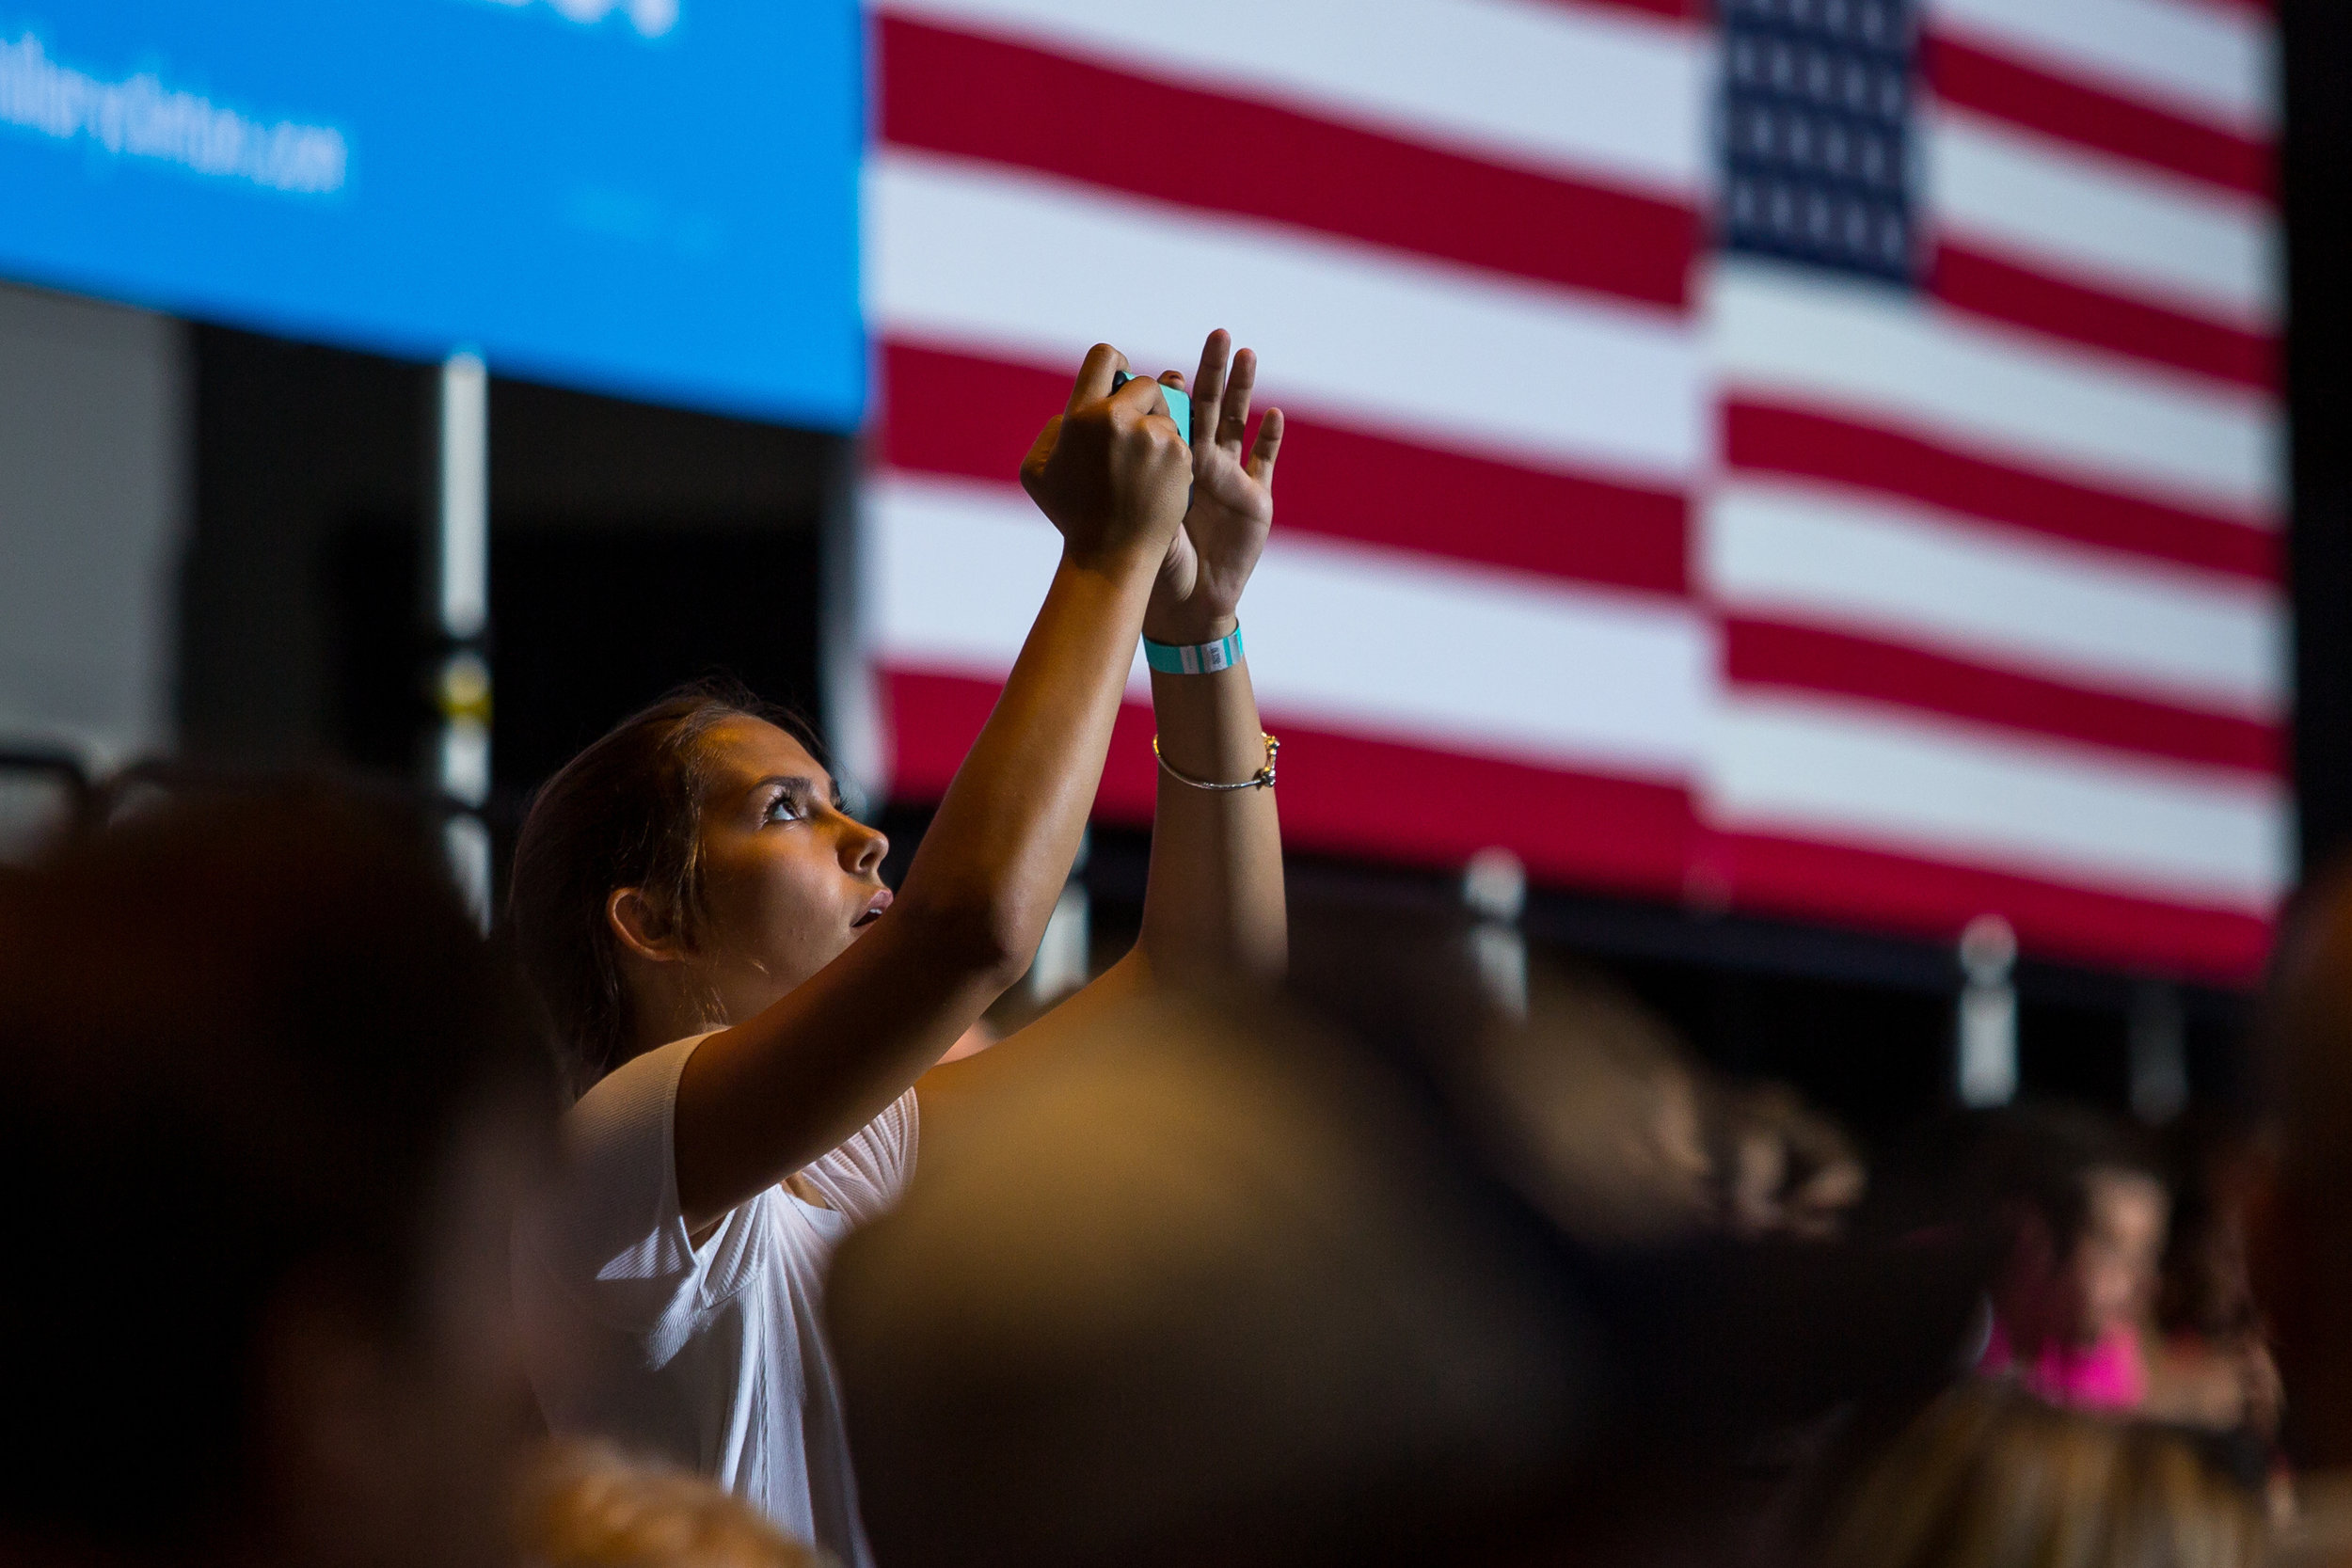  A girls takes a photo on her phone before the beginning of the Hillary Clinton and Tim Kaine rally at the David L. Lawrence Convention Center on Saturday evening. Clinton has clenched the democratic nomination and is the first major party female nom